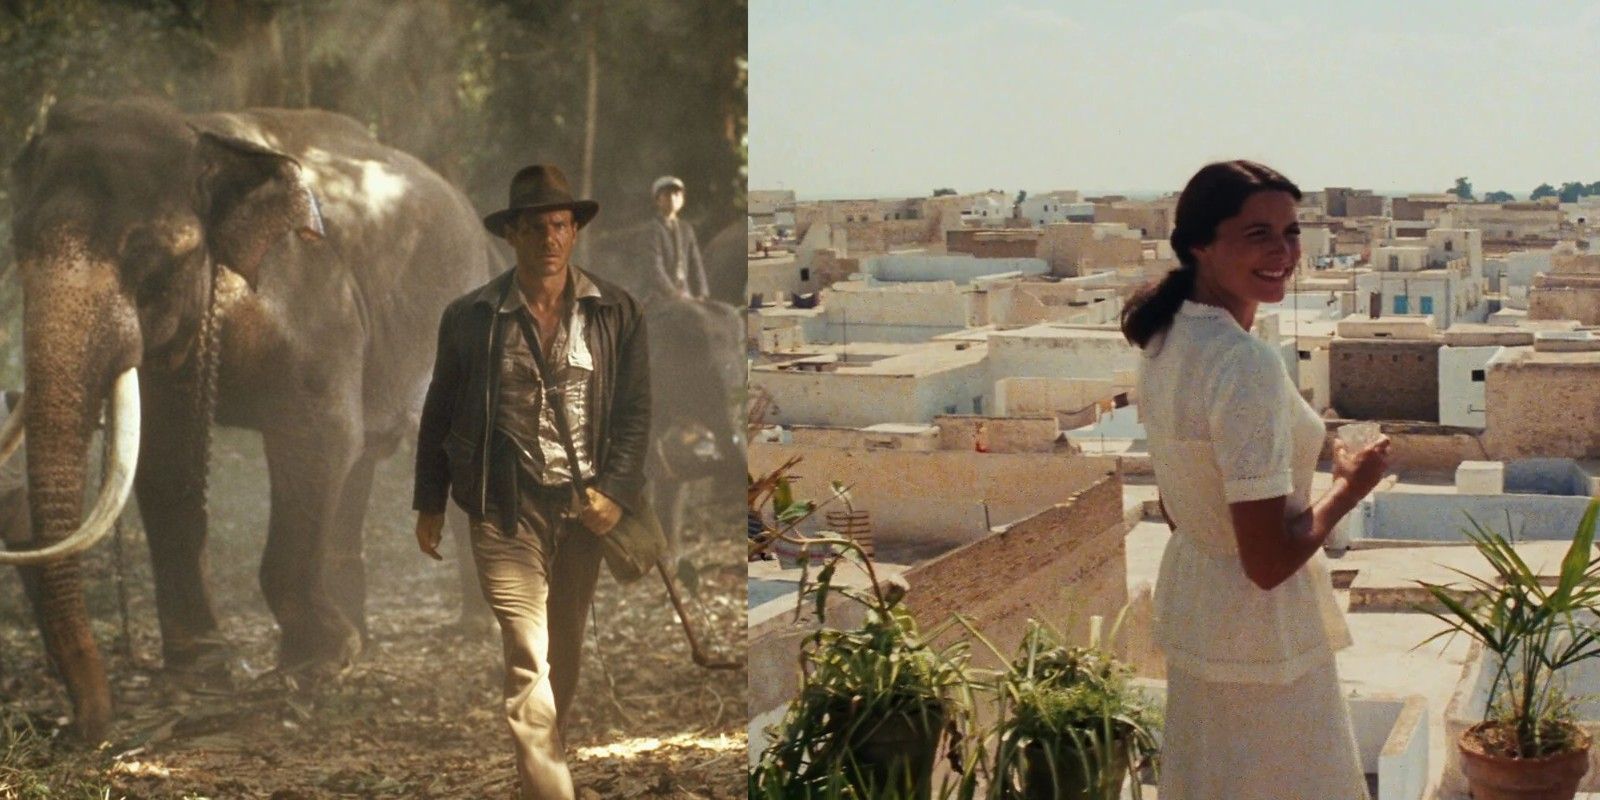 Indiana Jones in different countries